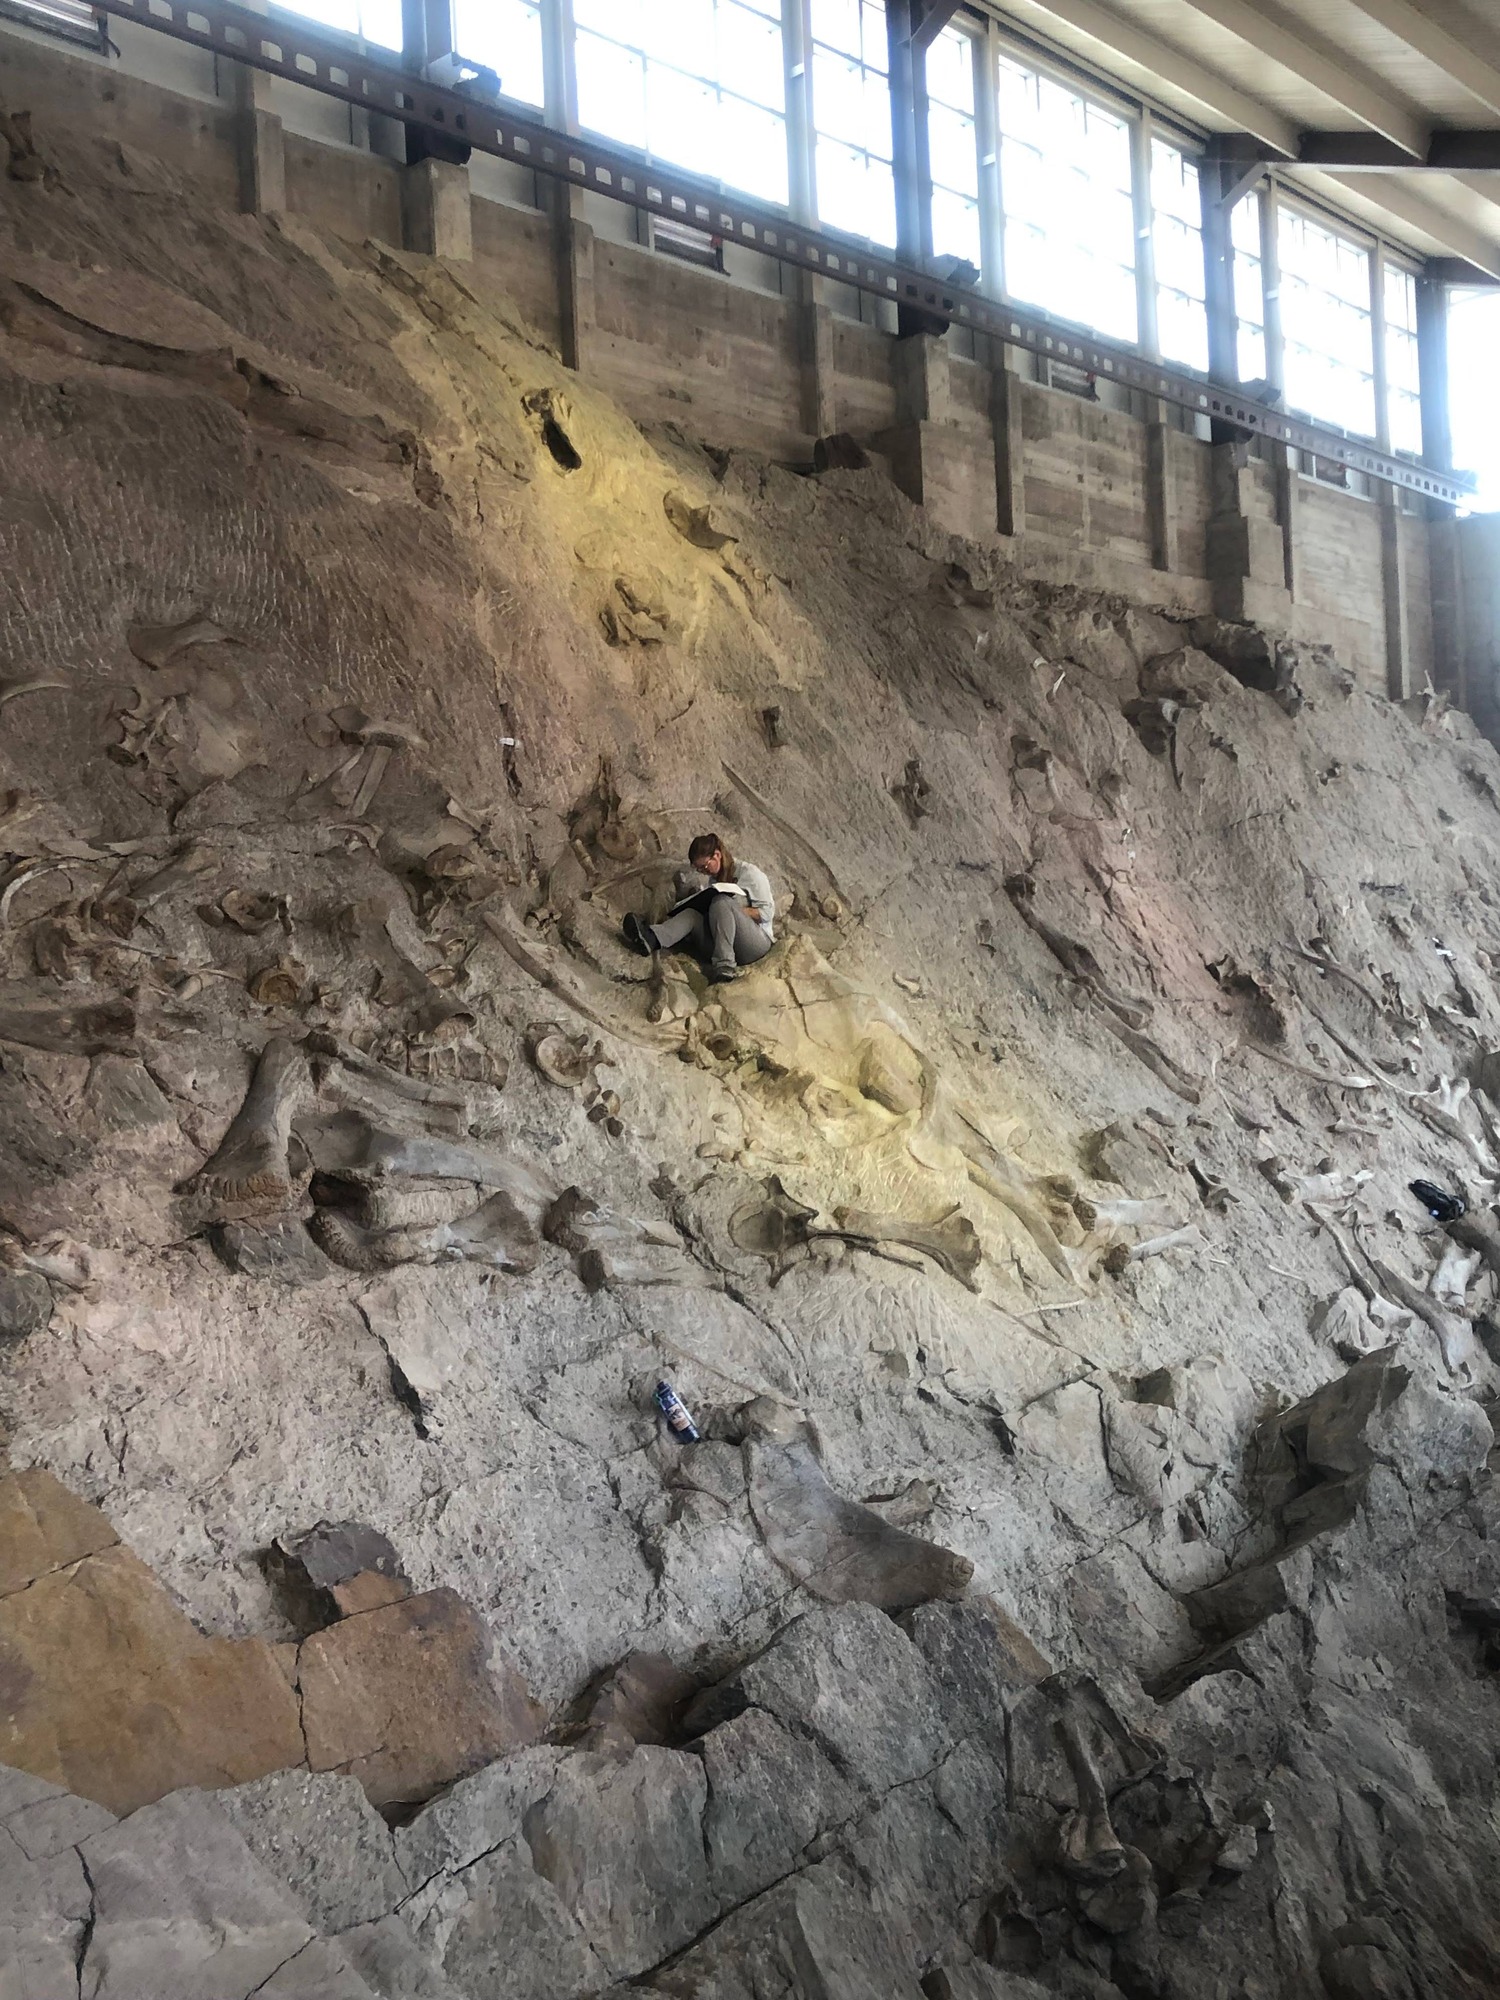 Person working among fossil bones on a large quarry face inside a visitor center.